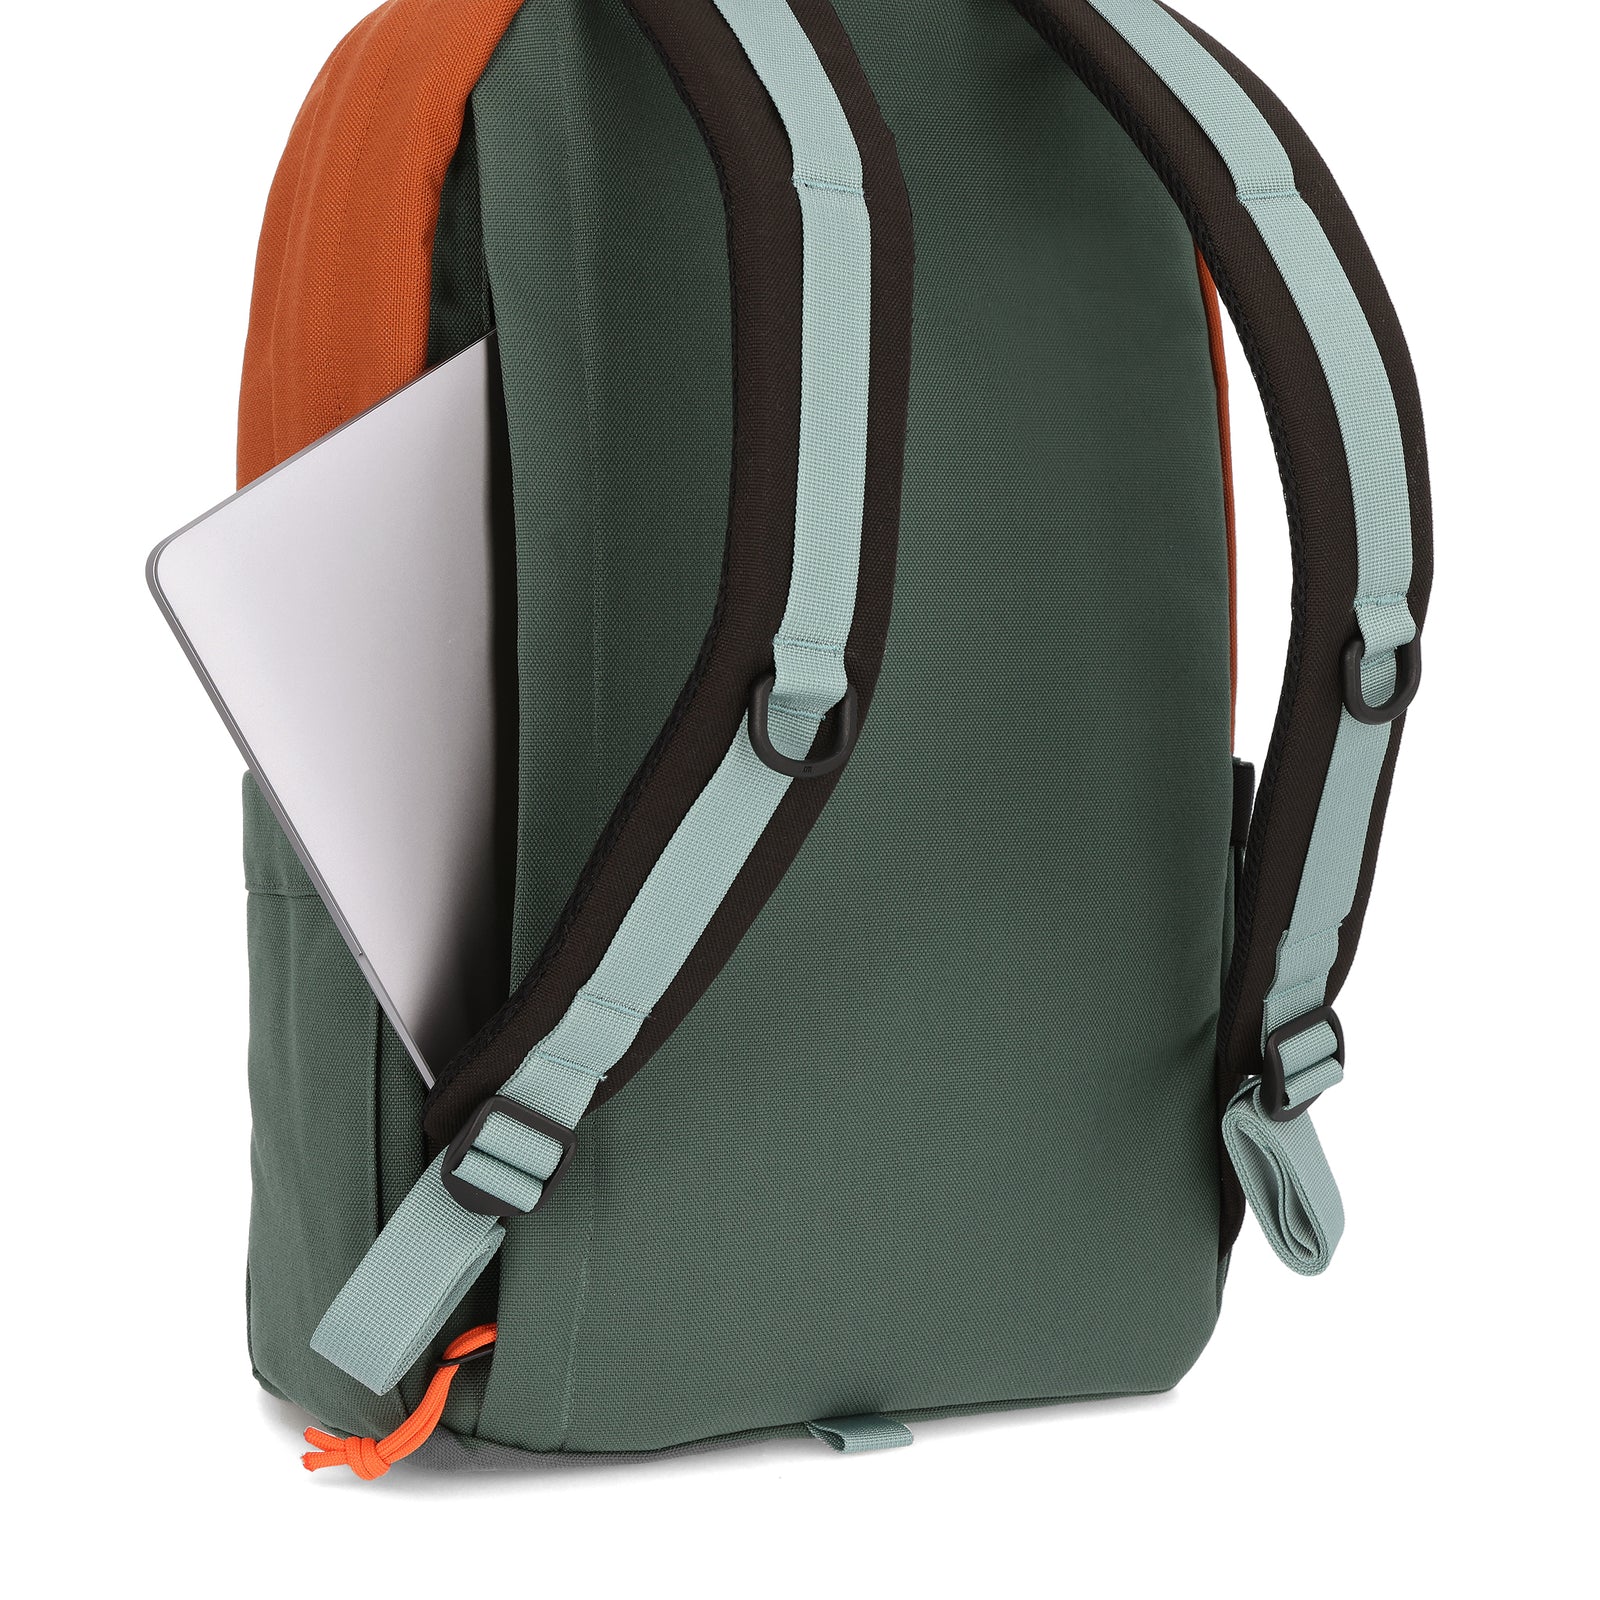 General shot Topo Designs Daypack Classic 100% recycled nylon laptop backpack for work or school in "Khaki / Forest / Clay".